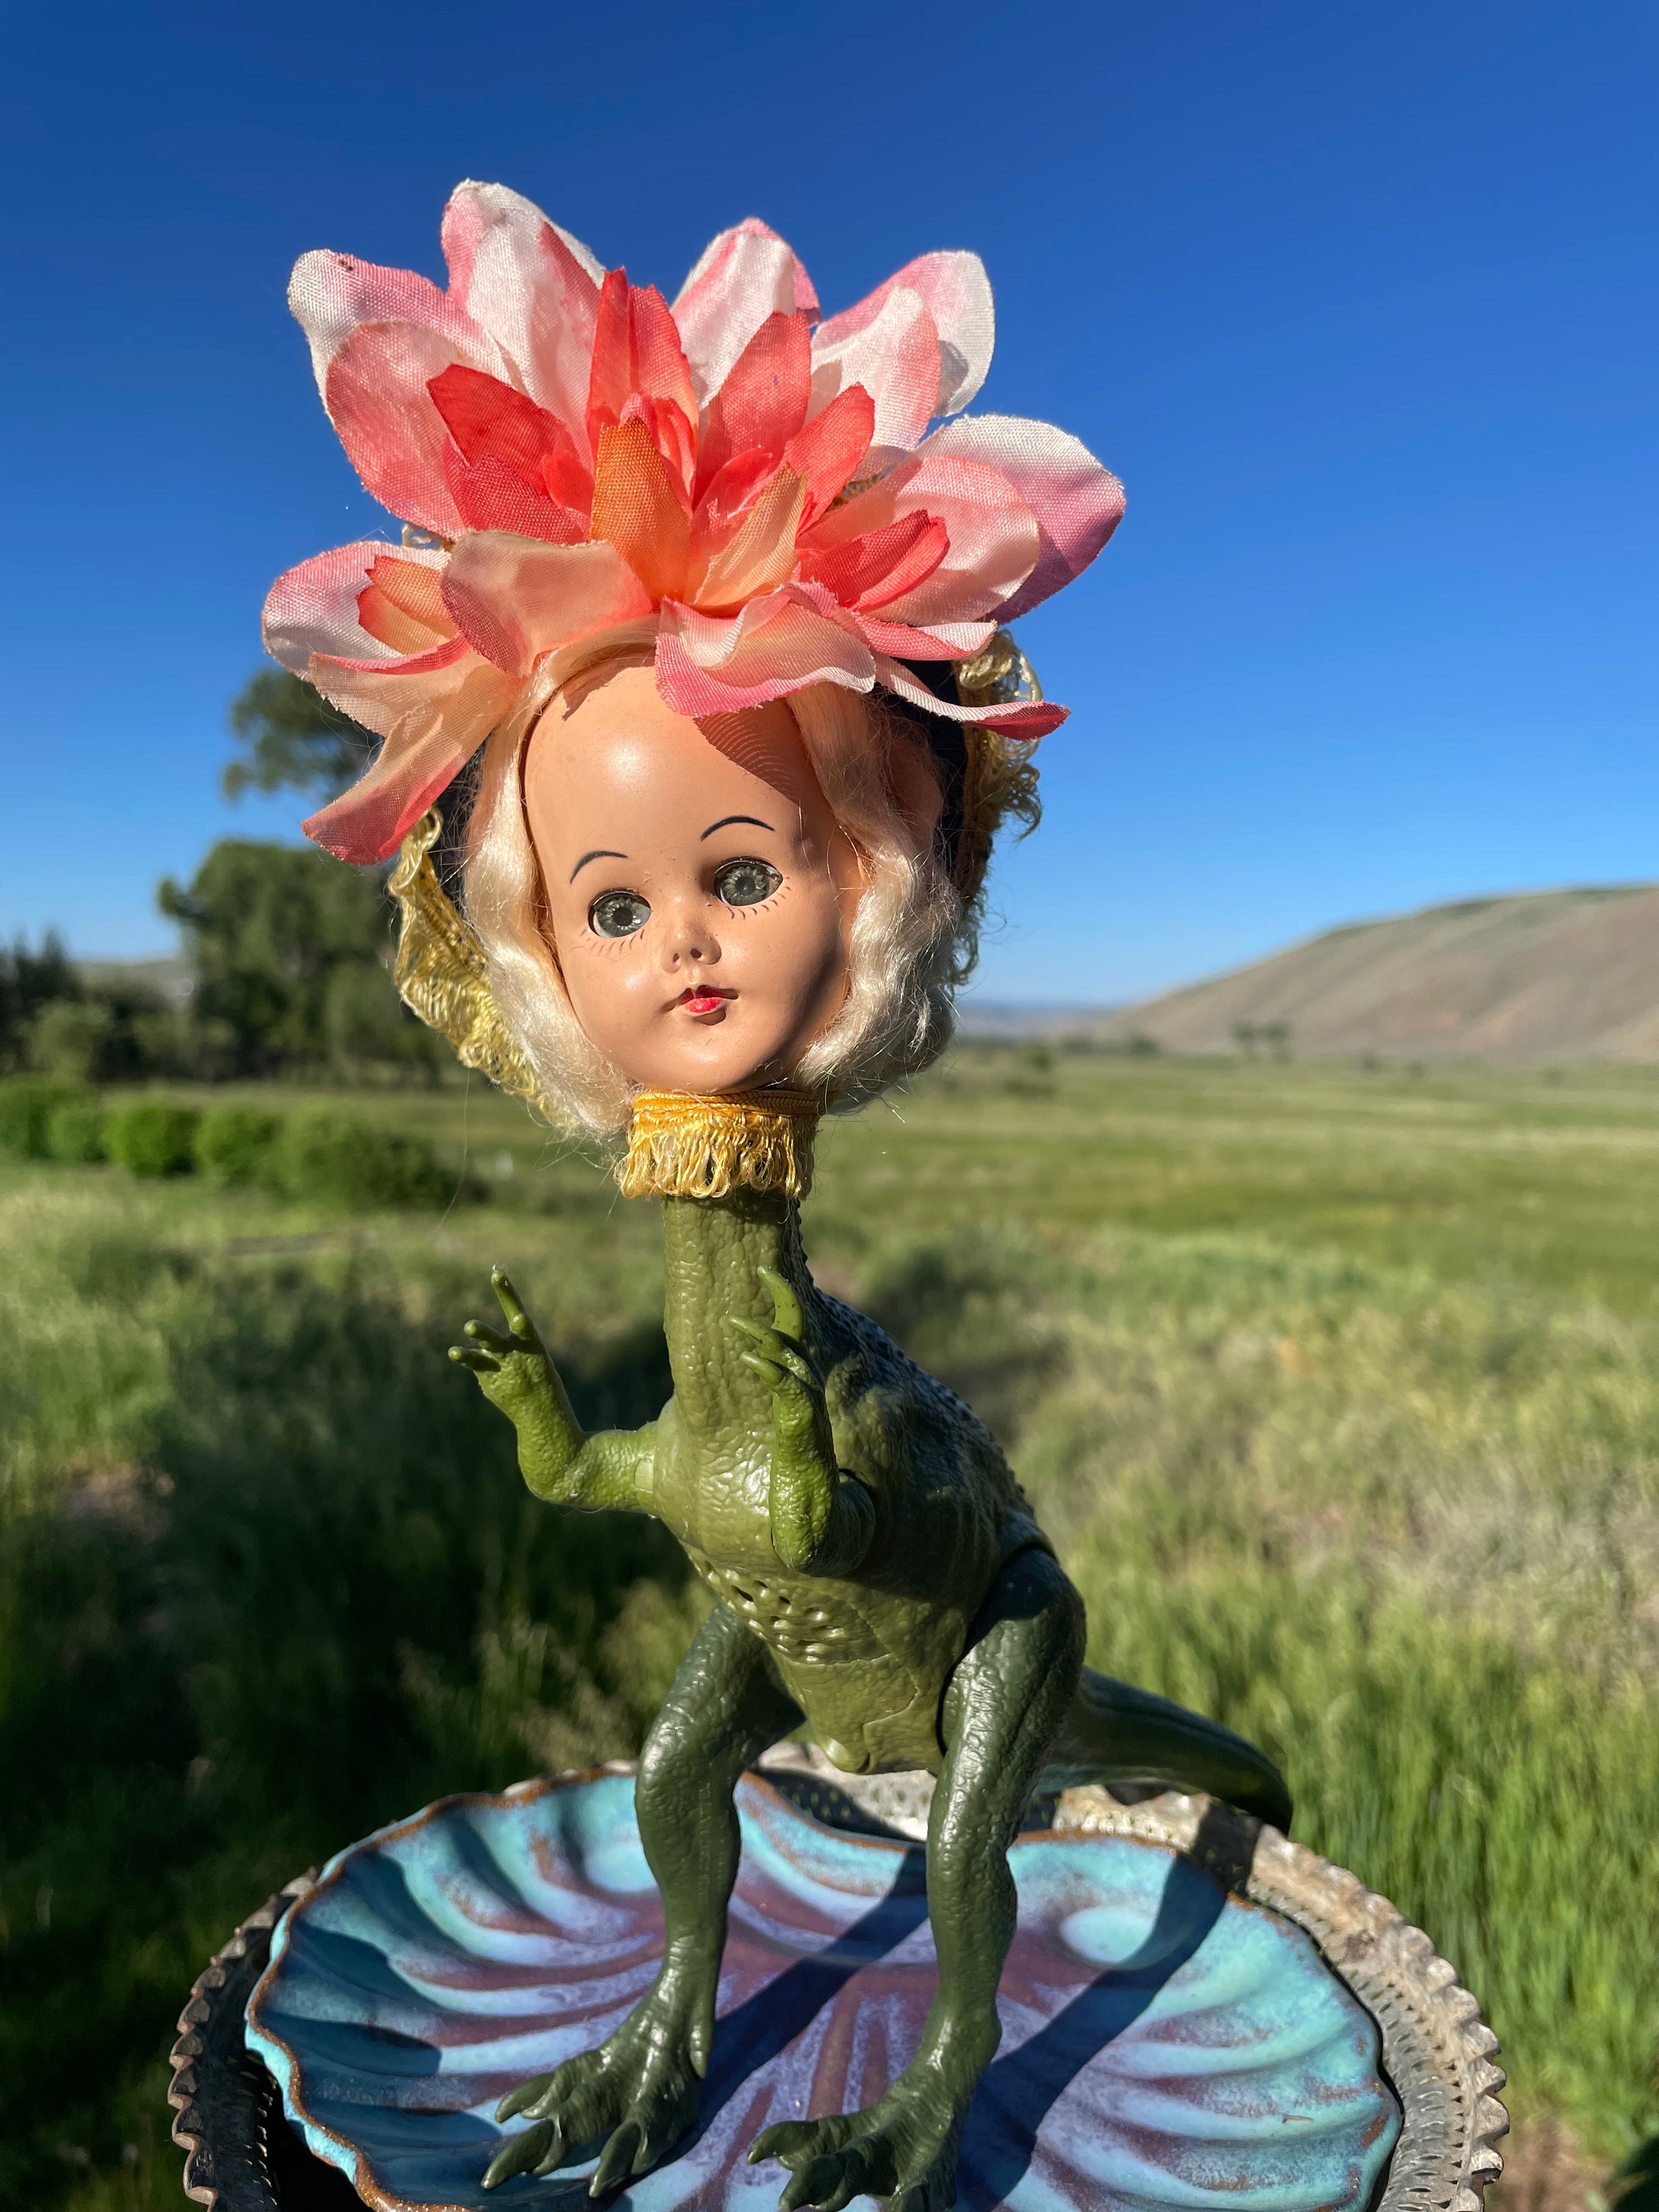 stic jointed dinosaur body with pose able arms and legs, vintage doll head and flower headdress. Has a working voice box with dinosaur growls - see video below. New batteries. 11" tall x 3" wide x 9" long